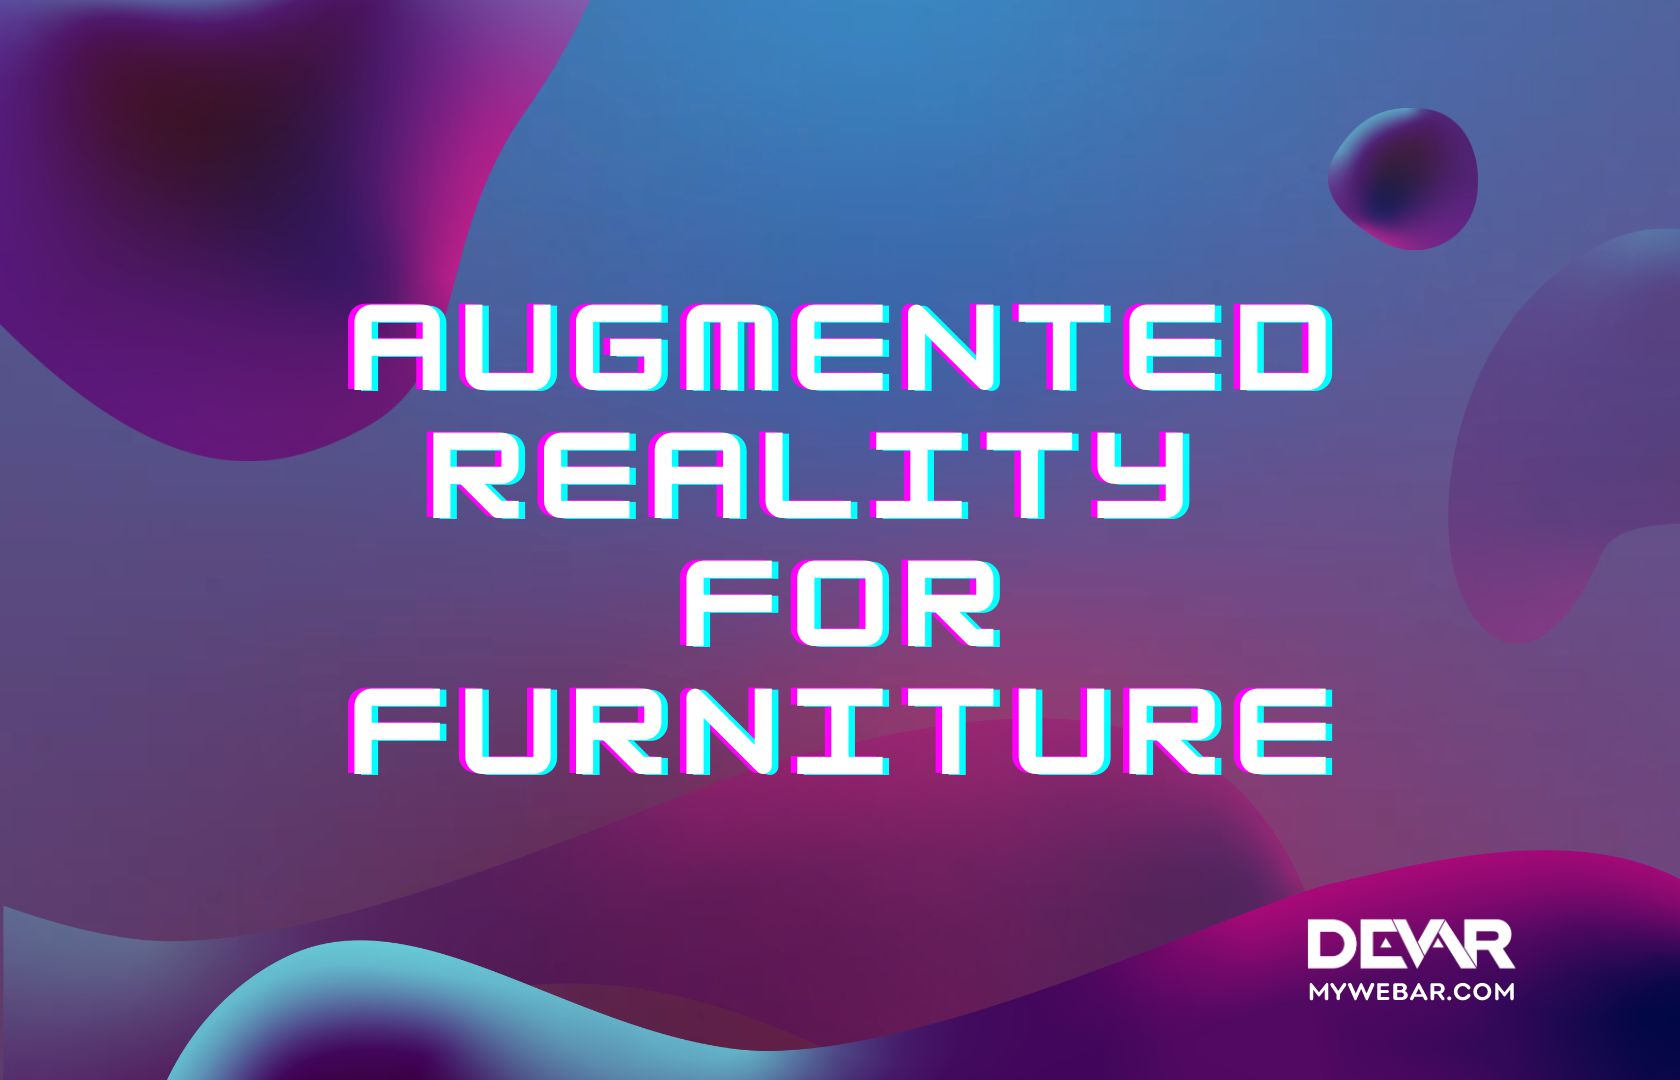 Augmented Reality for Furniture: Expanding your furniture shopping experience